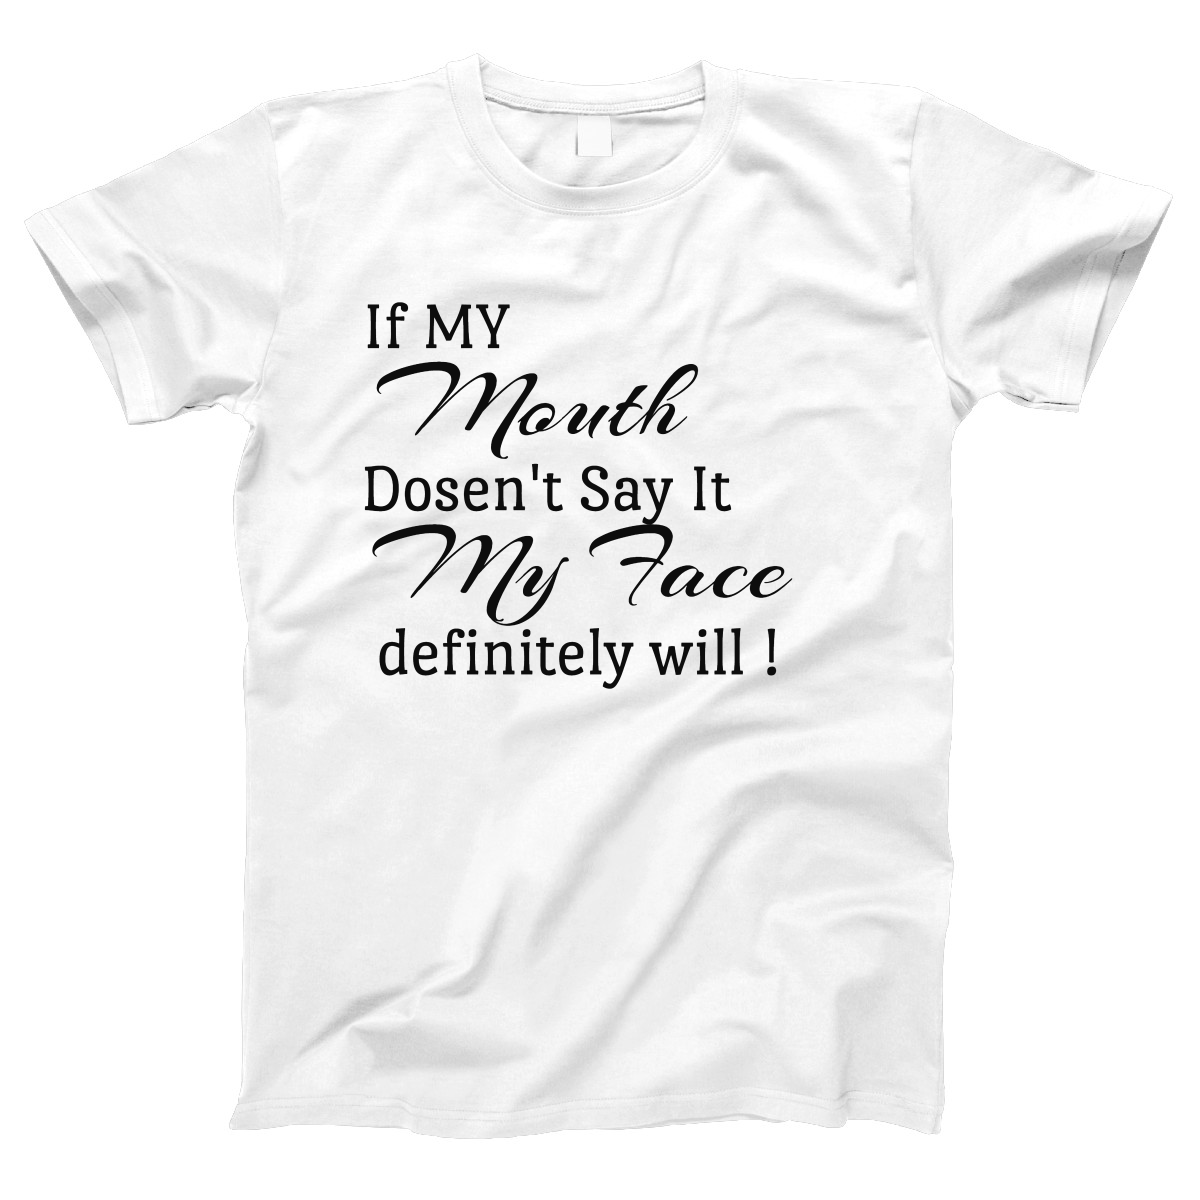 If My Mouth Doesn't Say It My Face Definitely Will  Women's T-shirt | White